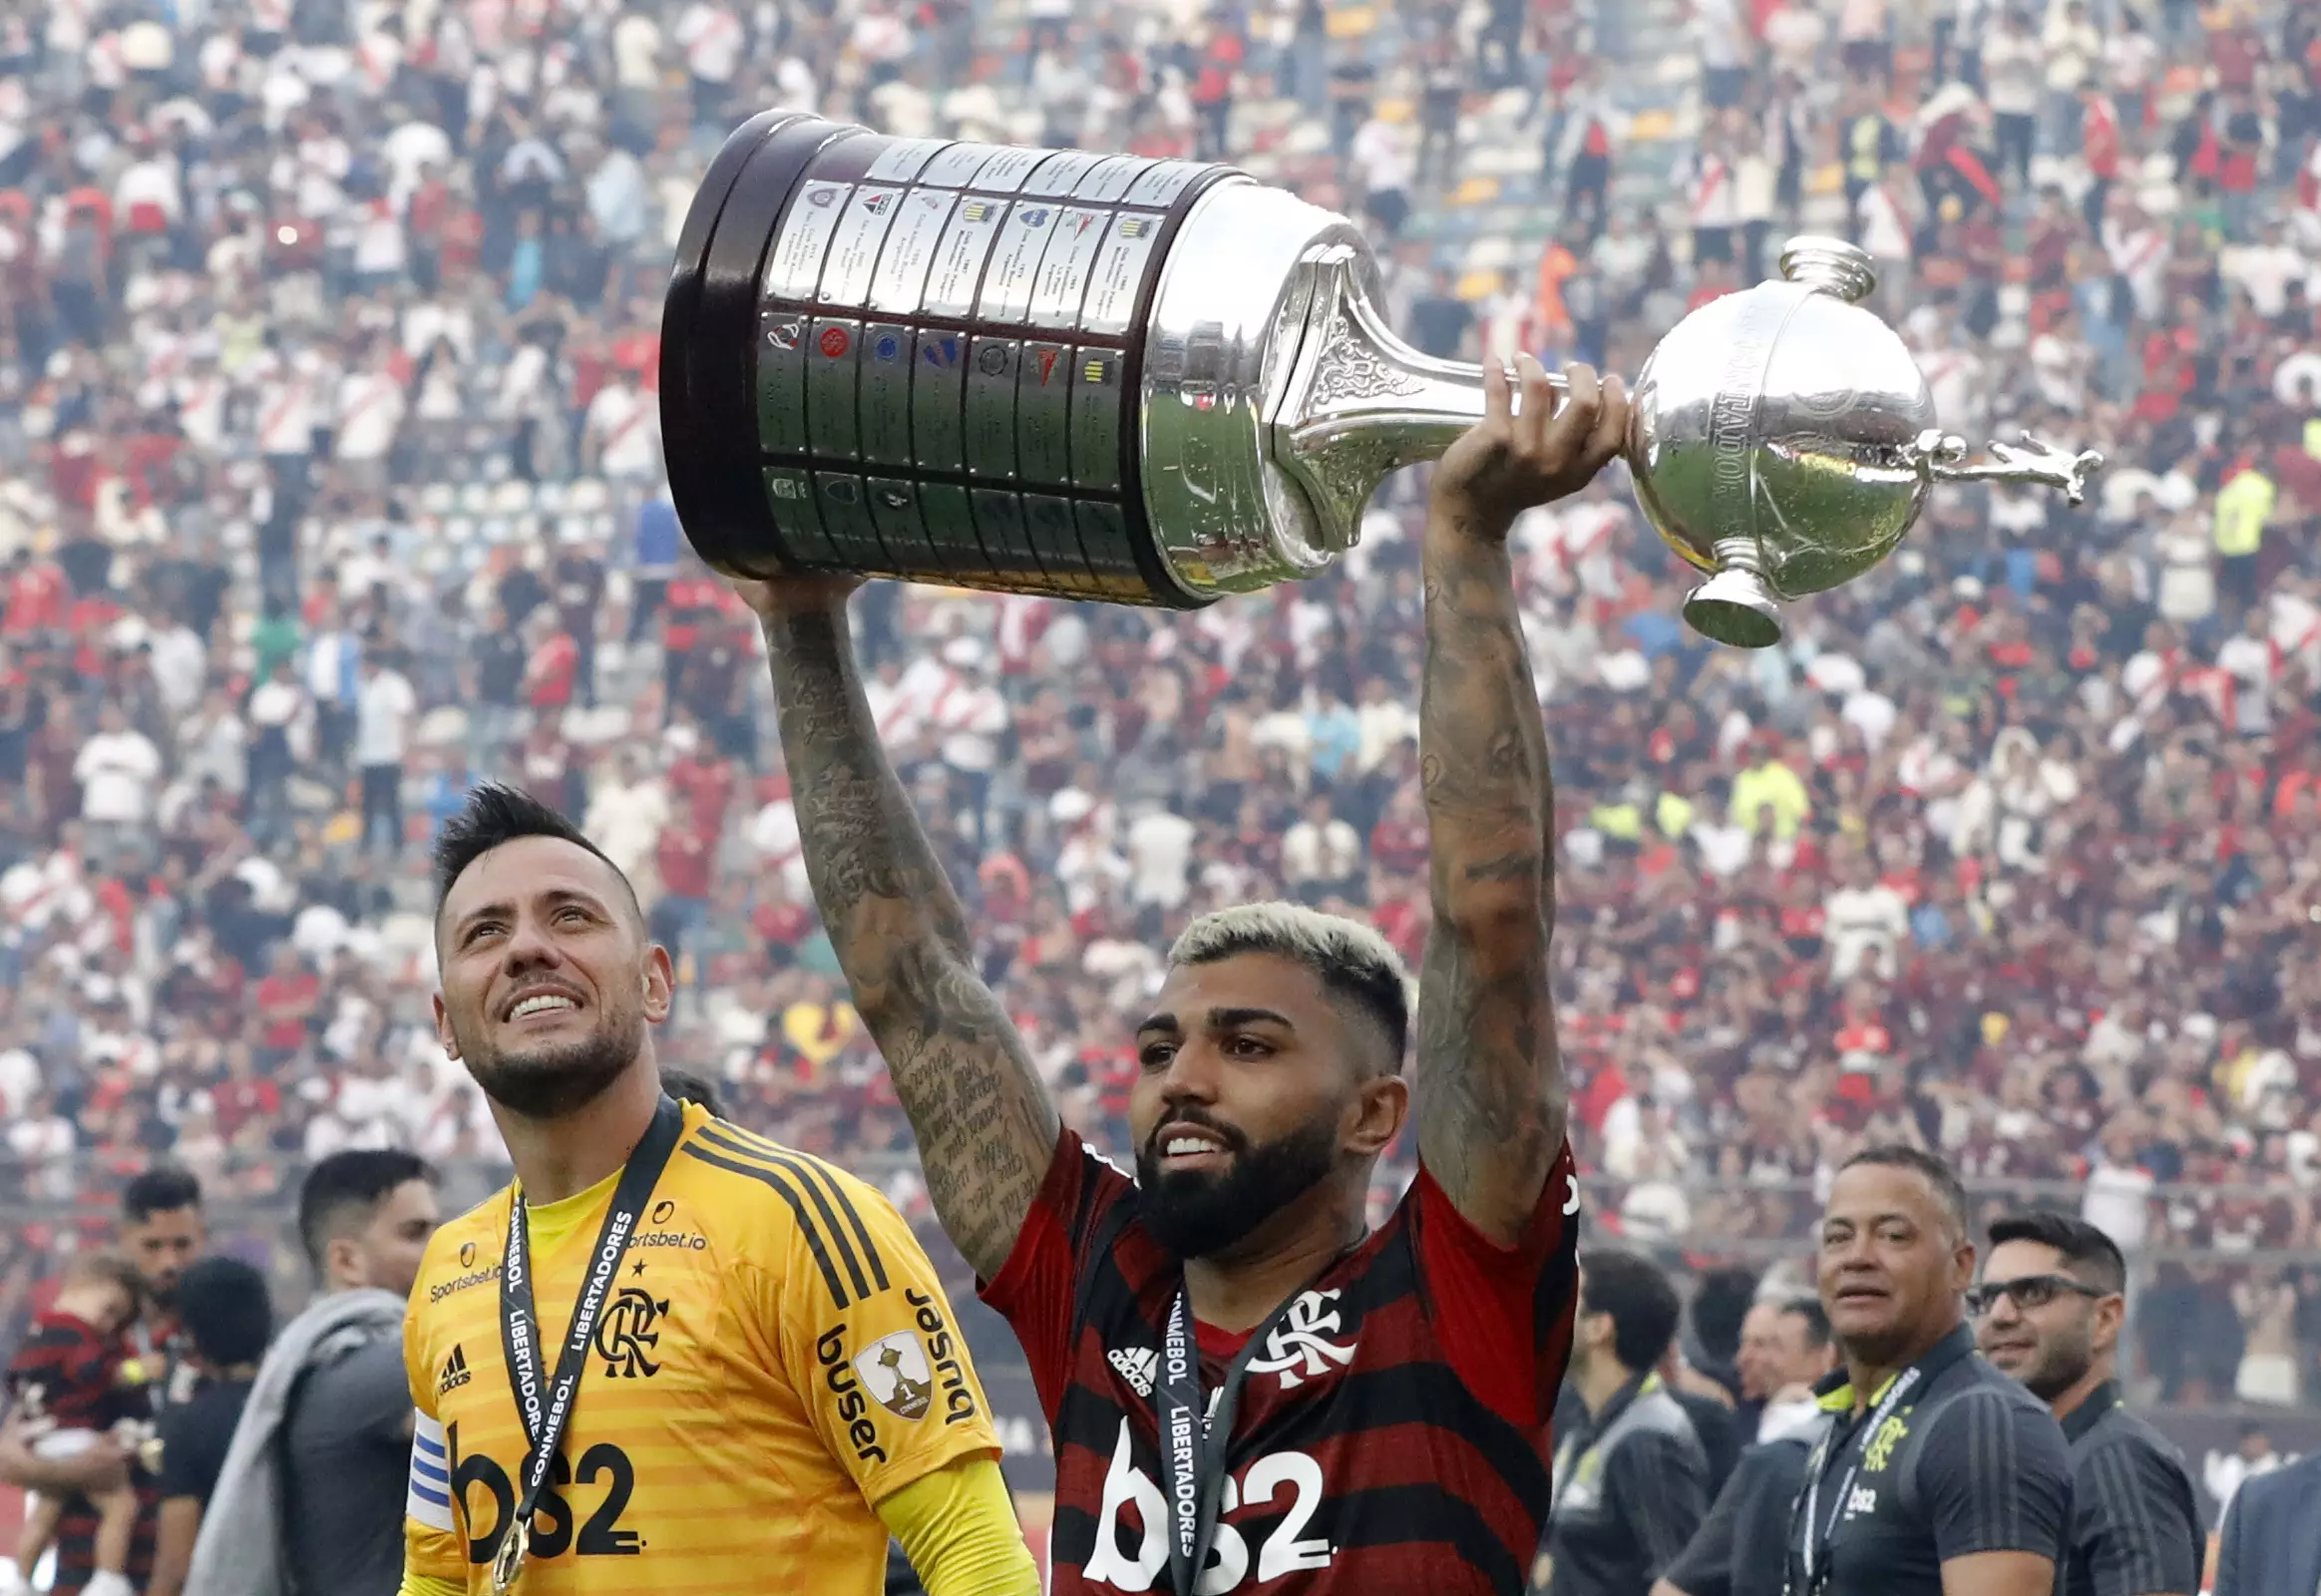 Barbosa's late goals won the Copa Libertadores for Flamengo. Image: PA Images